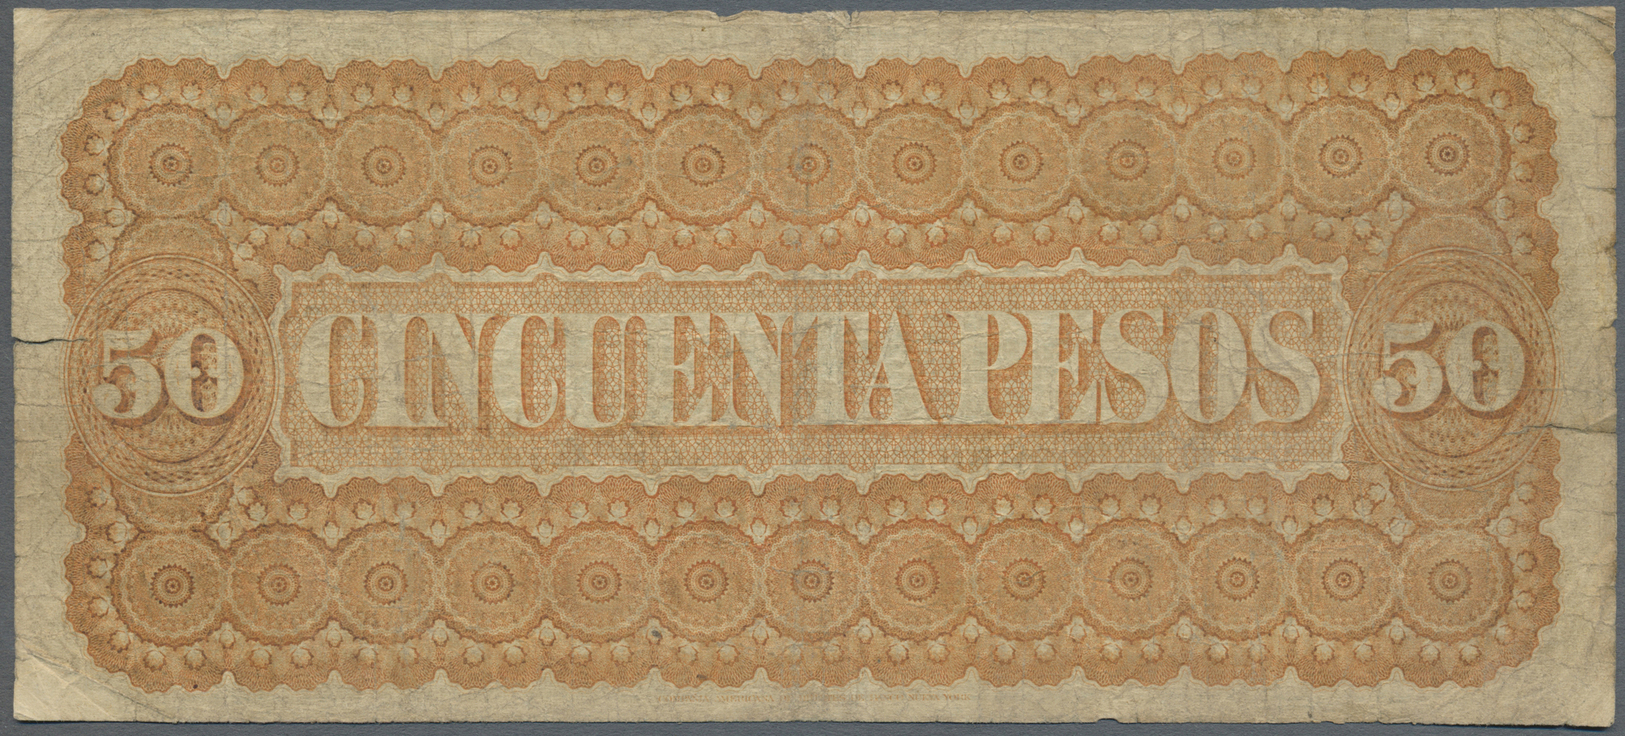 03482 Uruguay: Banco Oriental 5 Doblones De Oro Sellado 1867 P. S387, Stronger Used With Folds And Creases, Stained Pape - Uruguay